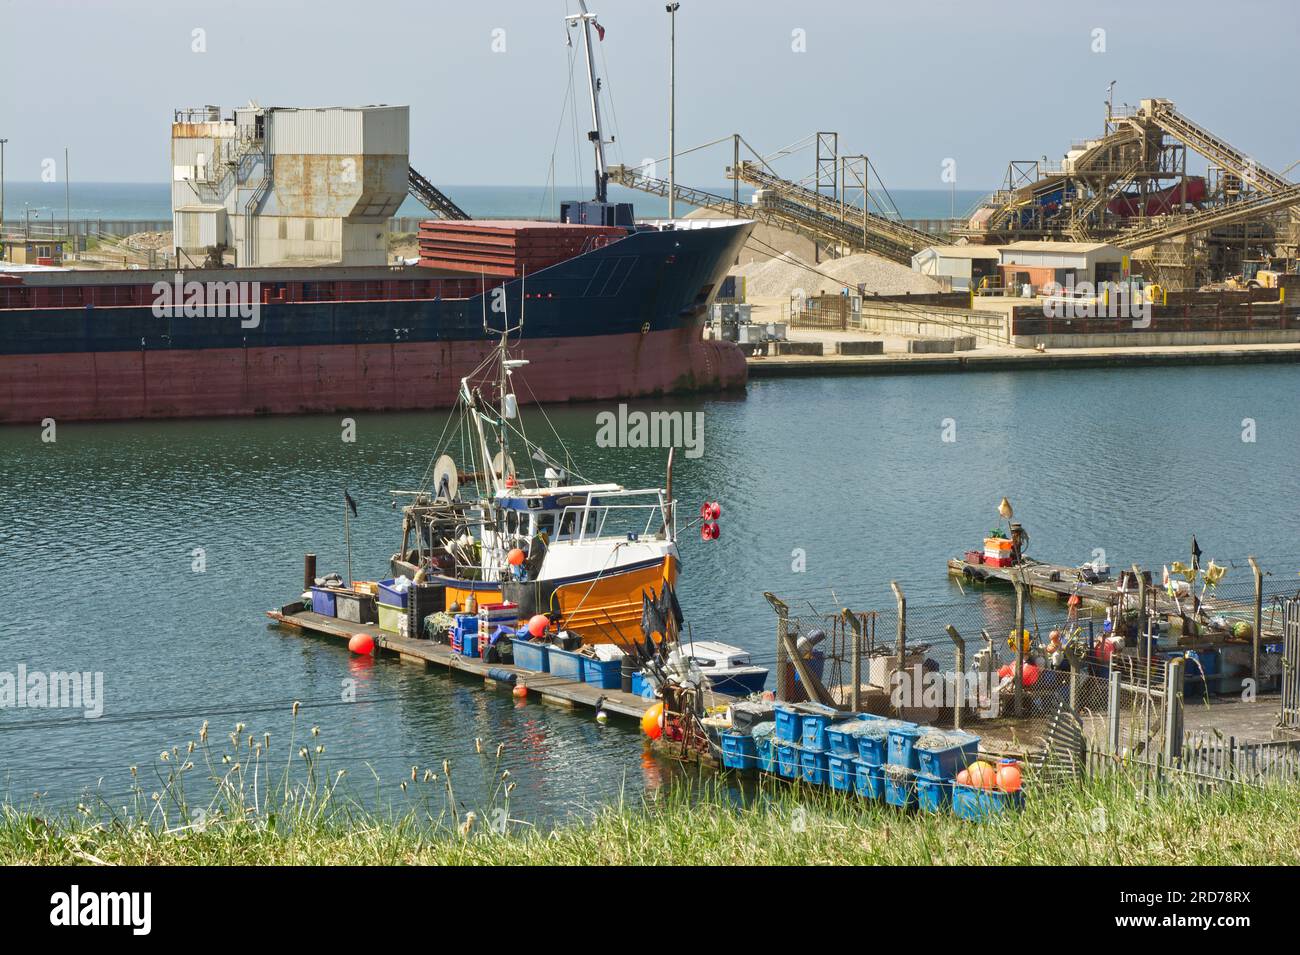 Fishing boat and large bulk carrier ship in port at Shoreham Harbour, West Sussex, England. No people. No logos. Stock Photo